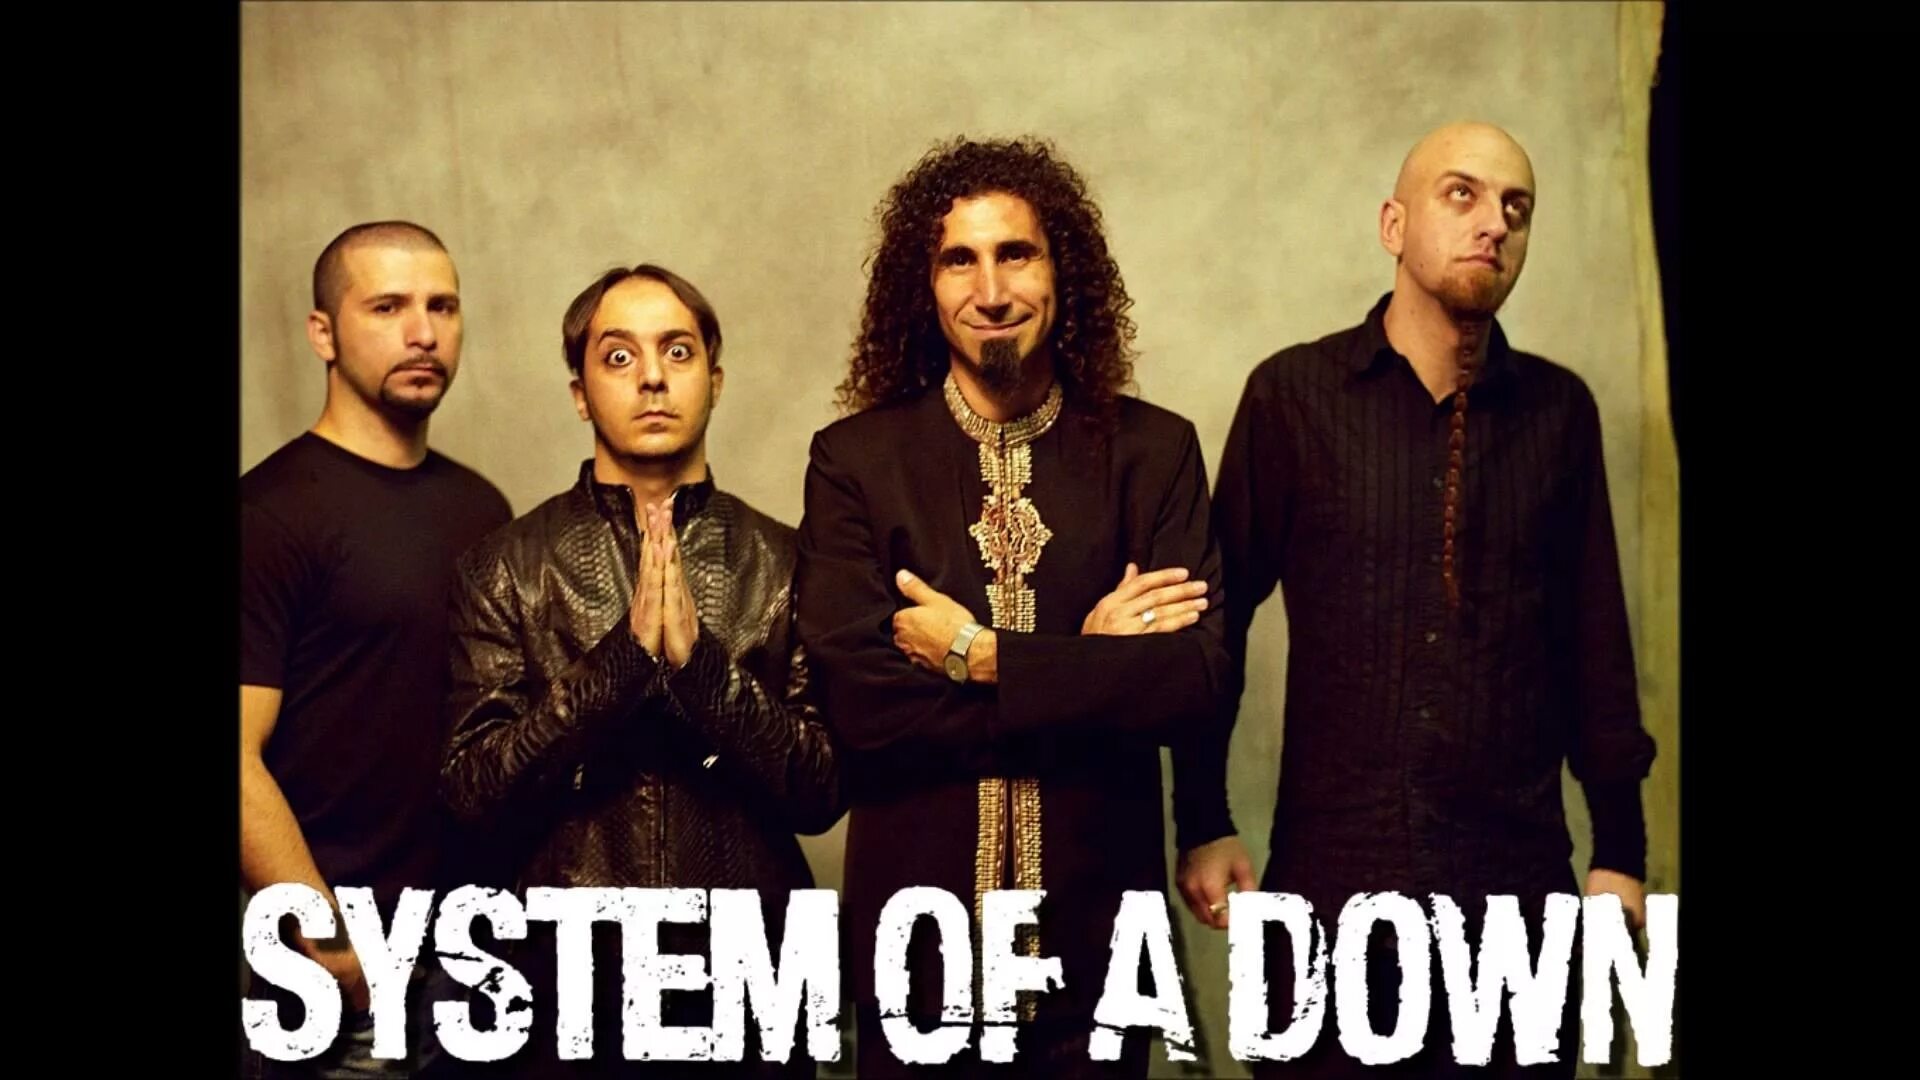 Группа System of a down. System of a down лысый. System of a down фото. Участники систем оф э давн. System of a down википедия